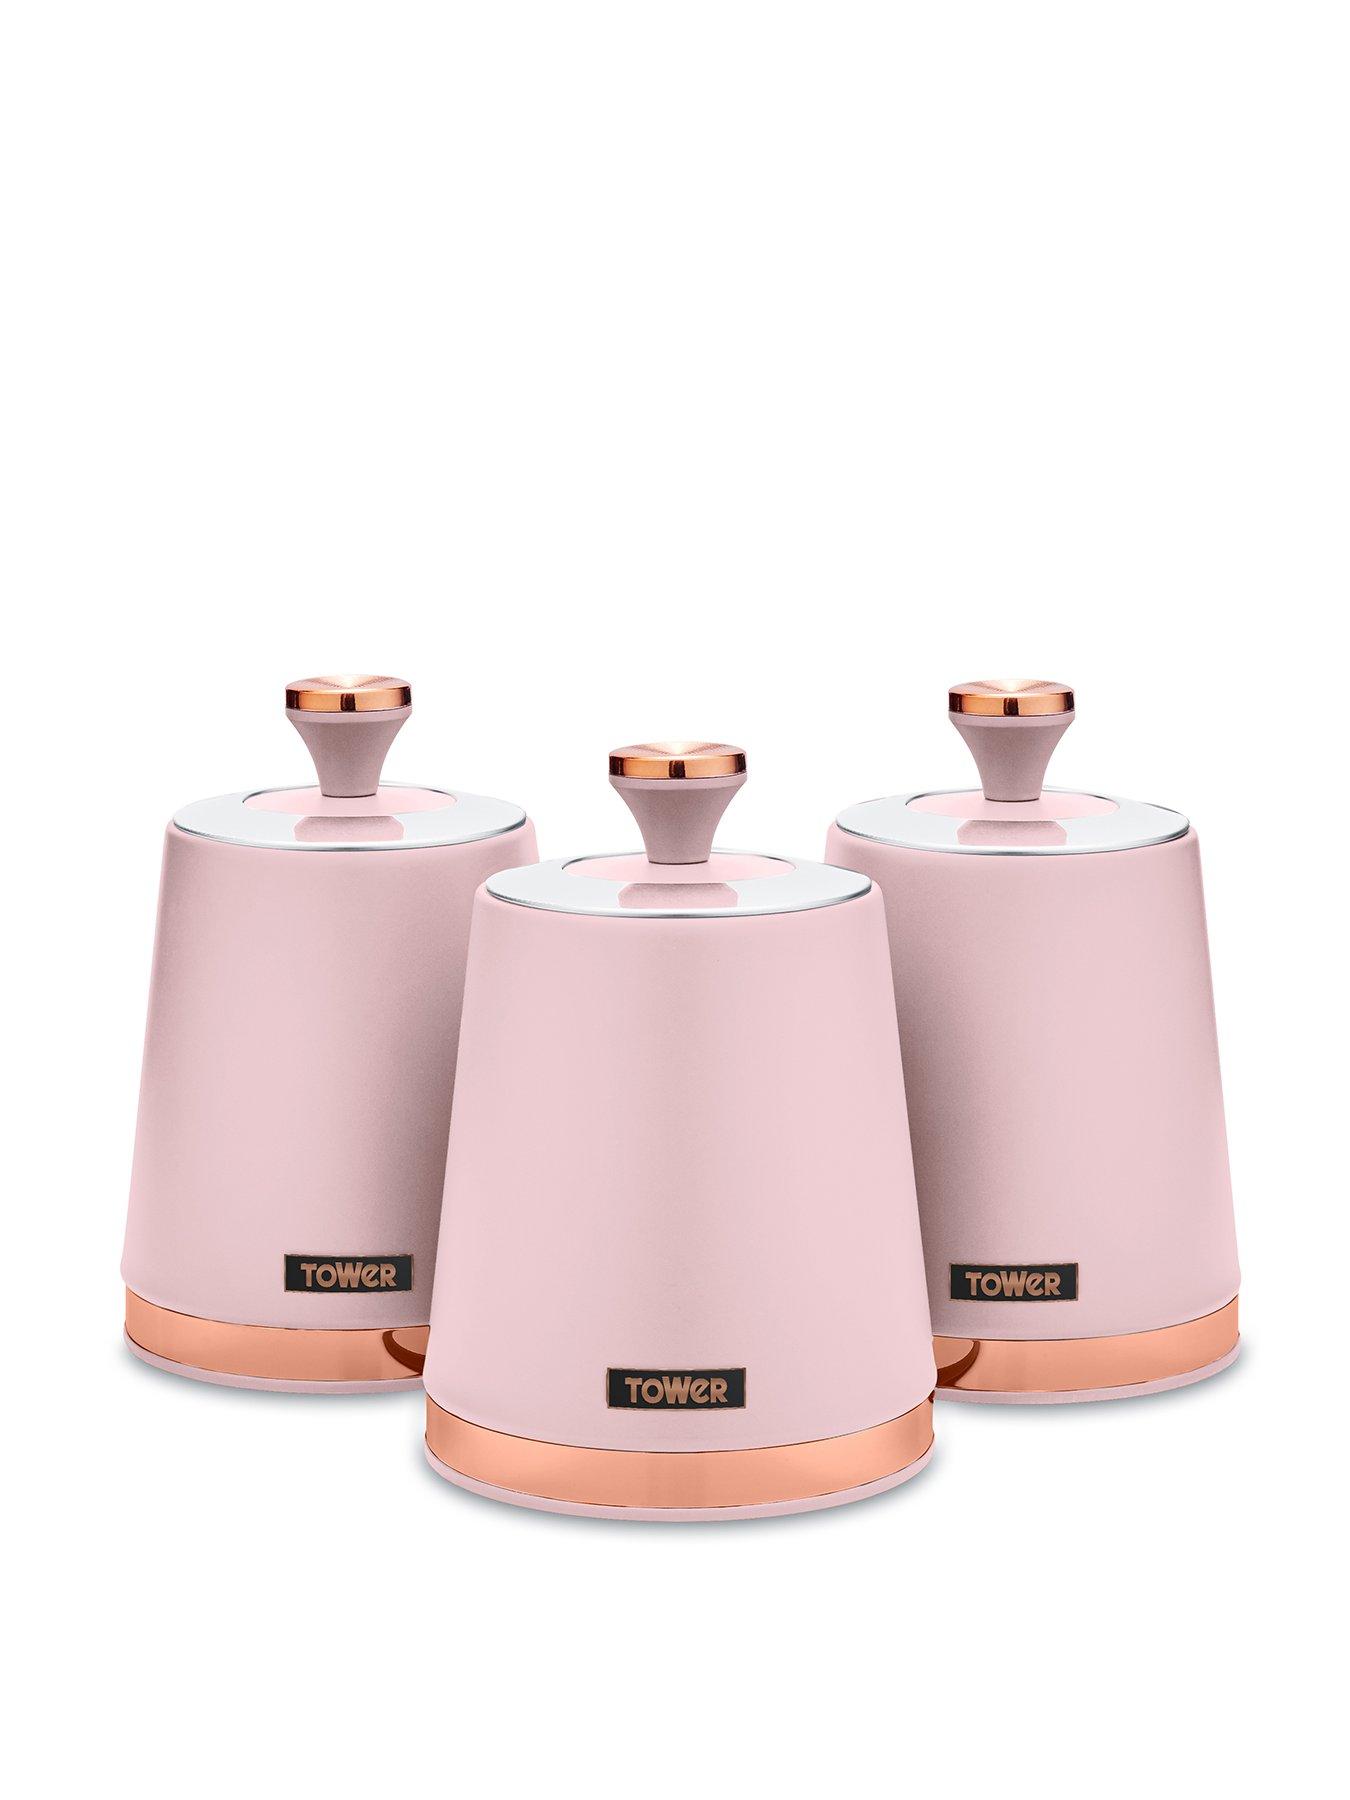 https://media.very.co.uk/i/very/QYAWH_SQ1_0000000063_PINK_SLf/tower-cavaletto-storage-canisters-in-pink-ndash-set-of-3.jpg?$180x240_retinamobilex2$&$roundel_very$&p1_img=sale_2017